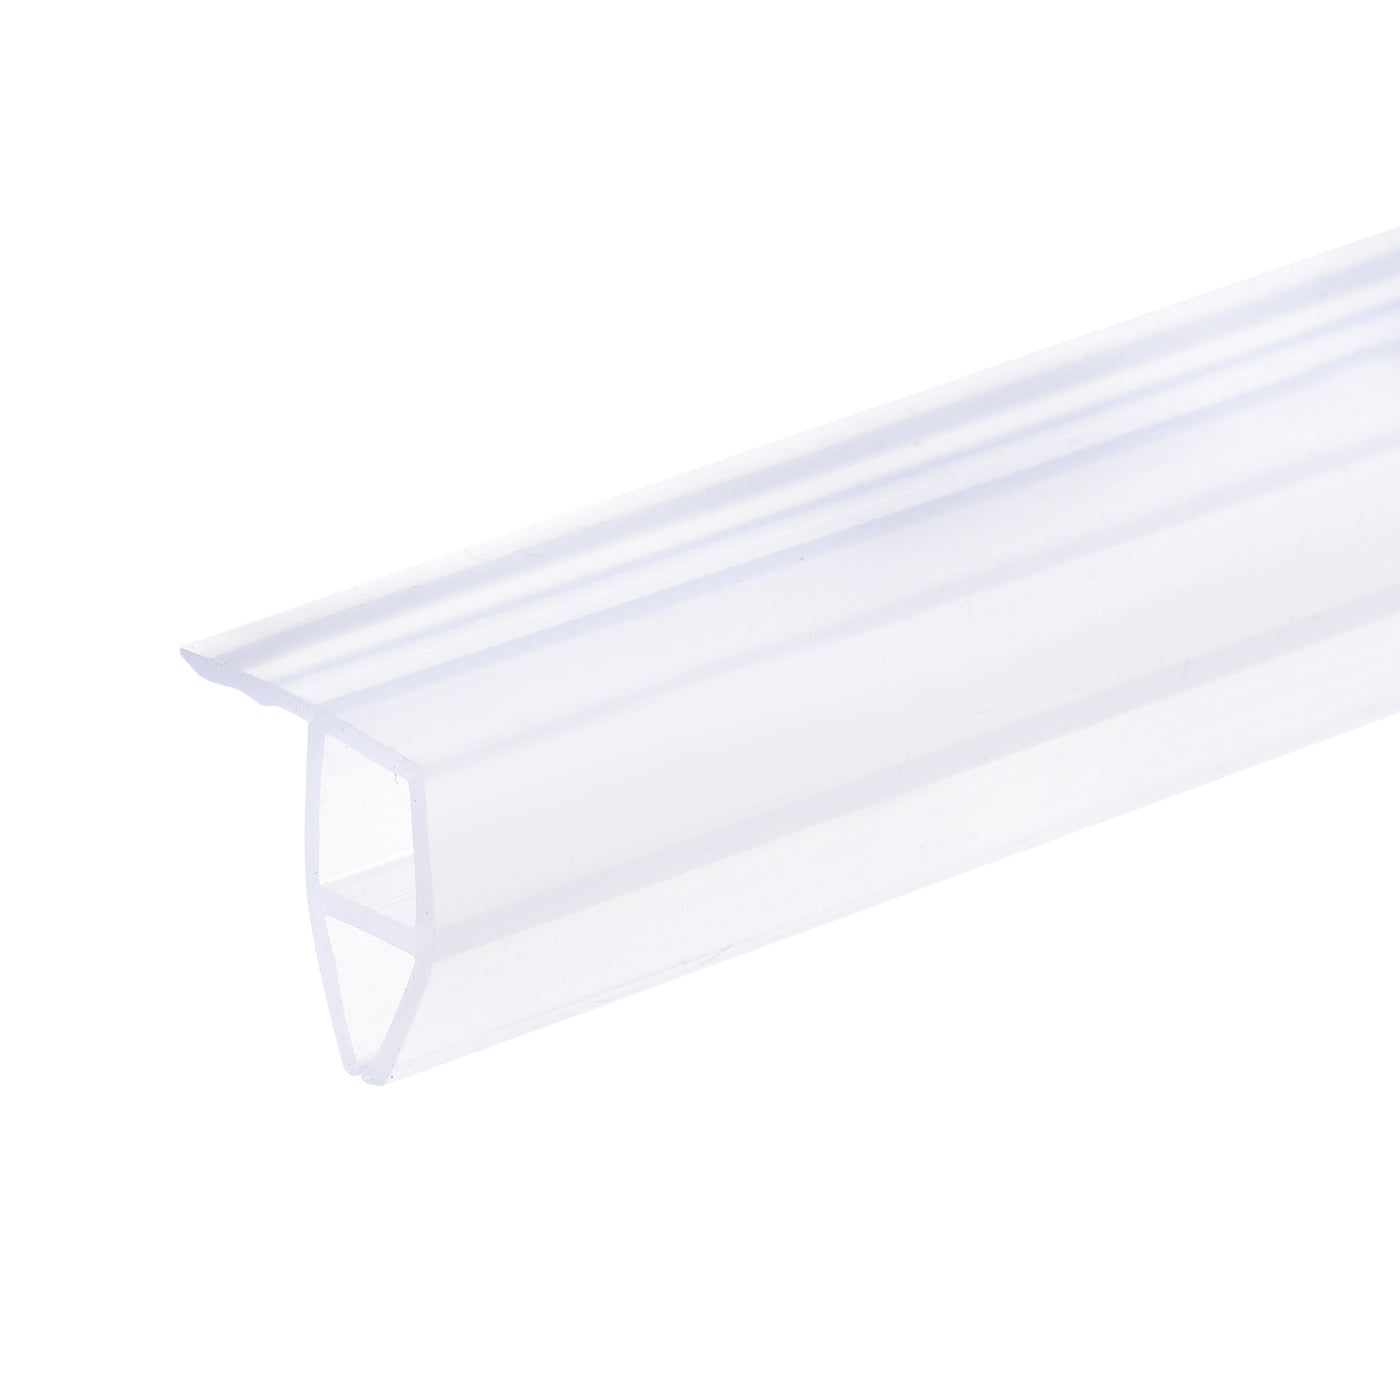 Uxcell Uxcell Frameless Glass Door Sweep 59.06" for 1/4"(6mm) Glass Corner-Type Seal Strip